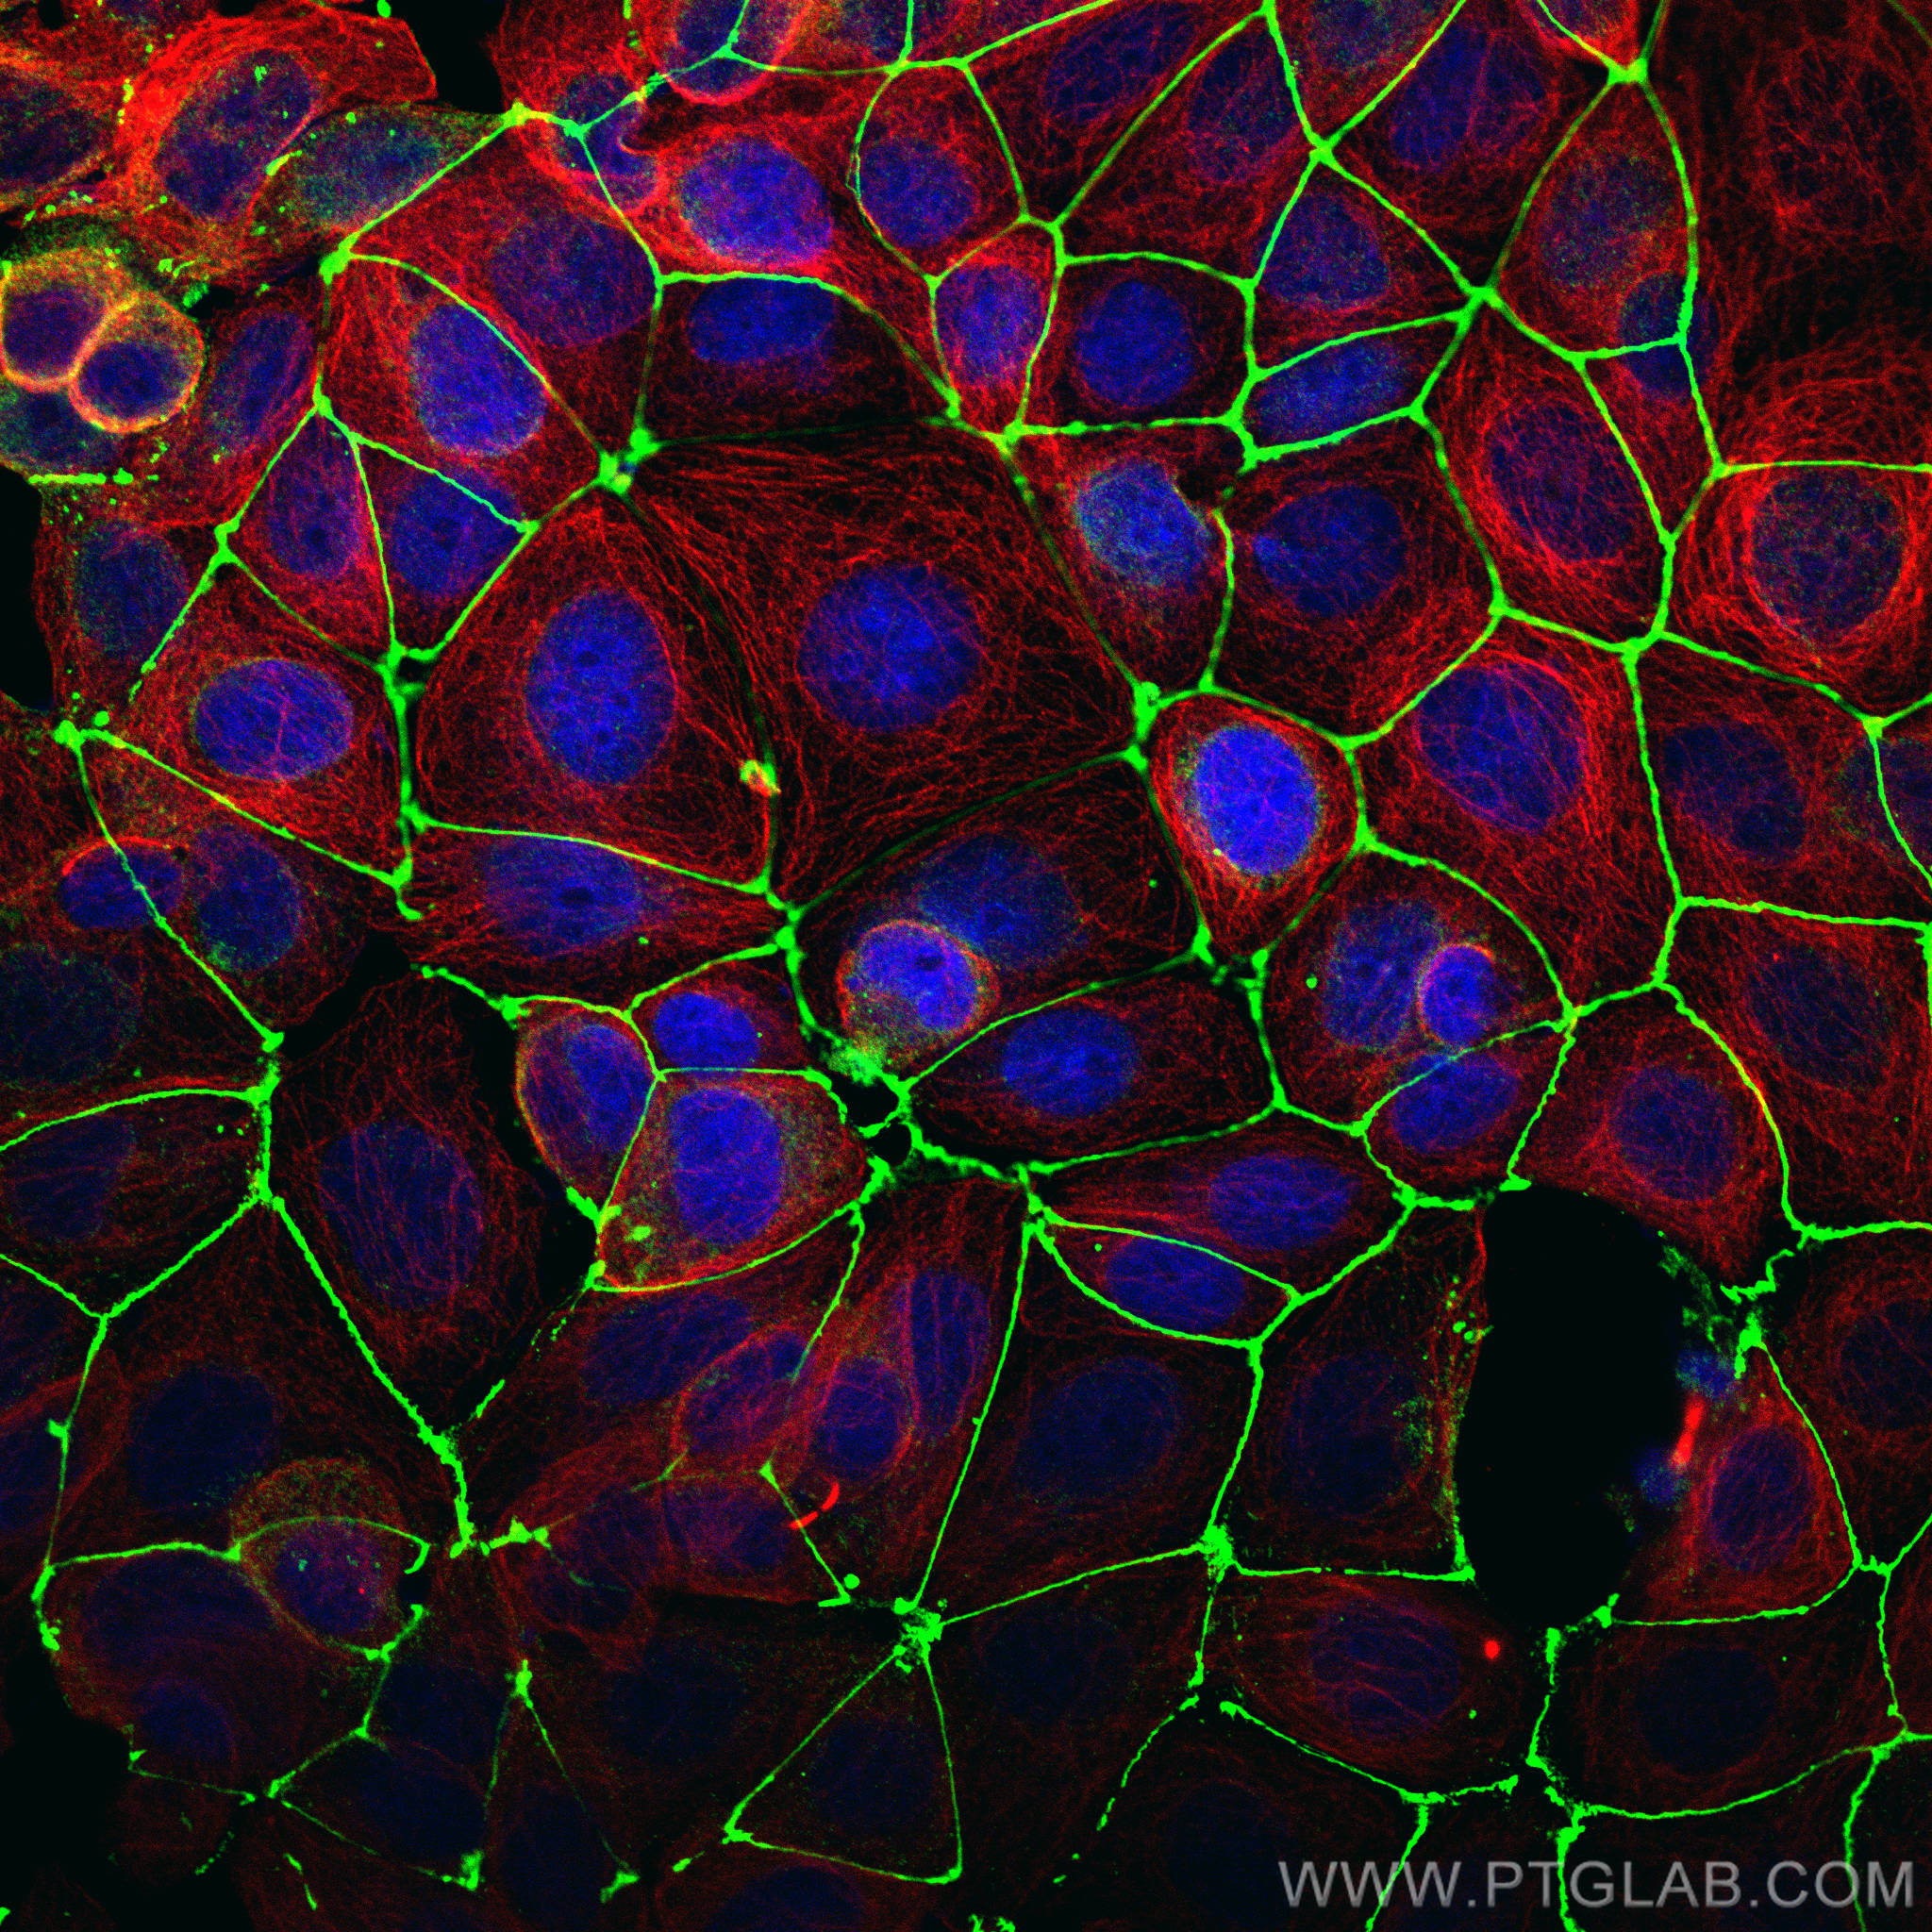 Immunofluorescence (IF) analysis of MCF-7 cells stained with rabbit anti-ZO1 polyclonal antibody (21773-1-AP, green) and mouse anti-Alpha Tubulin monoclonal antibody (66031-1-Ig, red). Multi-rAb CoraLite® Plus 488-Goat Anti-Rabbit Recombinant Secondary Antibody (H+L) (RGAR002, 1:500) and Multi-rAb CoraLite® Plus 594-Goat Anti-Mouse Recombinant Secondary Antibody (H+L) (RGAM004, 1:500) were used for detection.